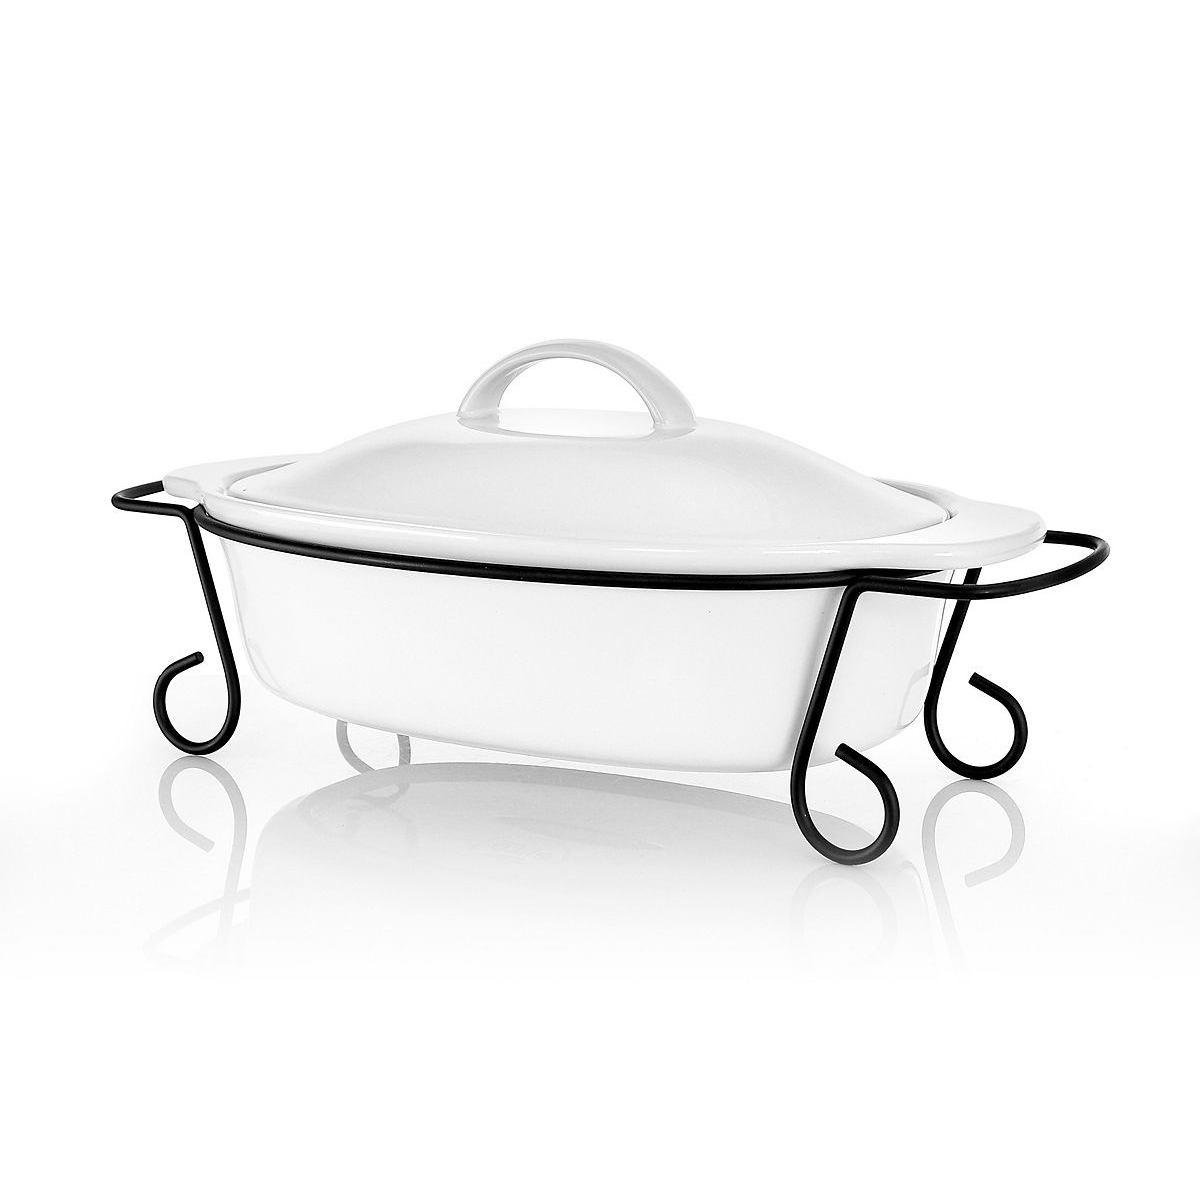 Gracious Dining Oval Stoneware Bakeware With Lid & Metal Rack